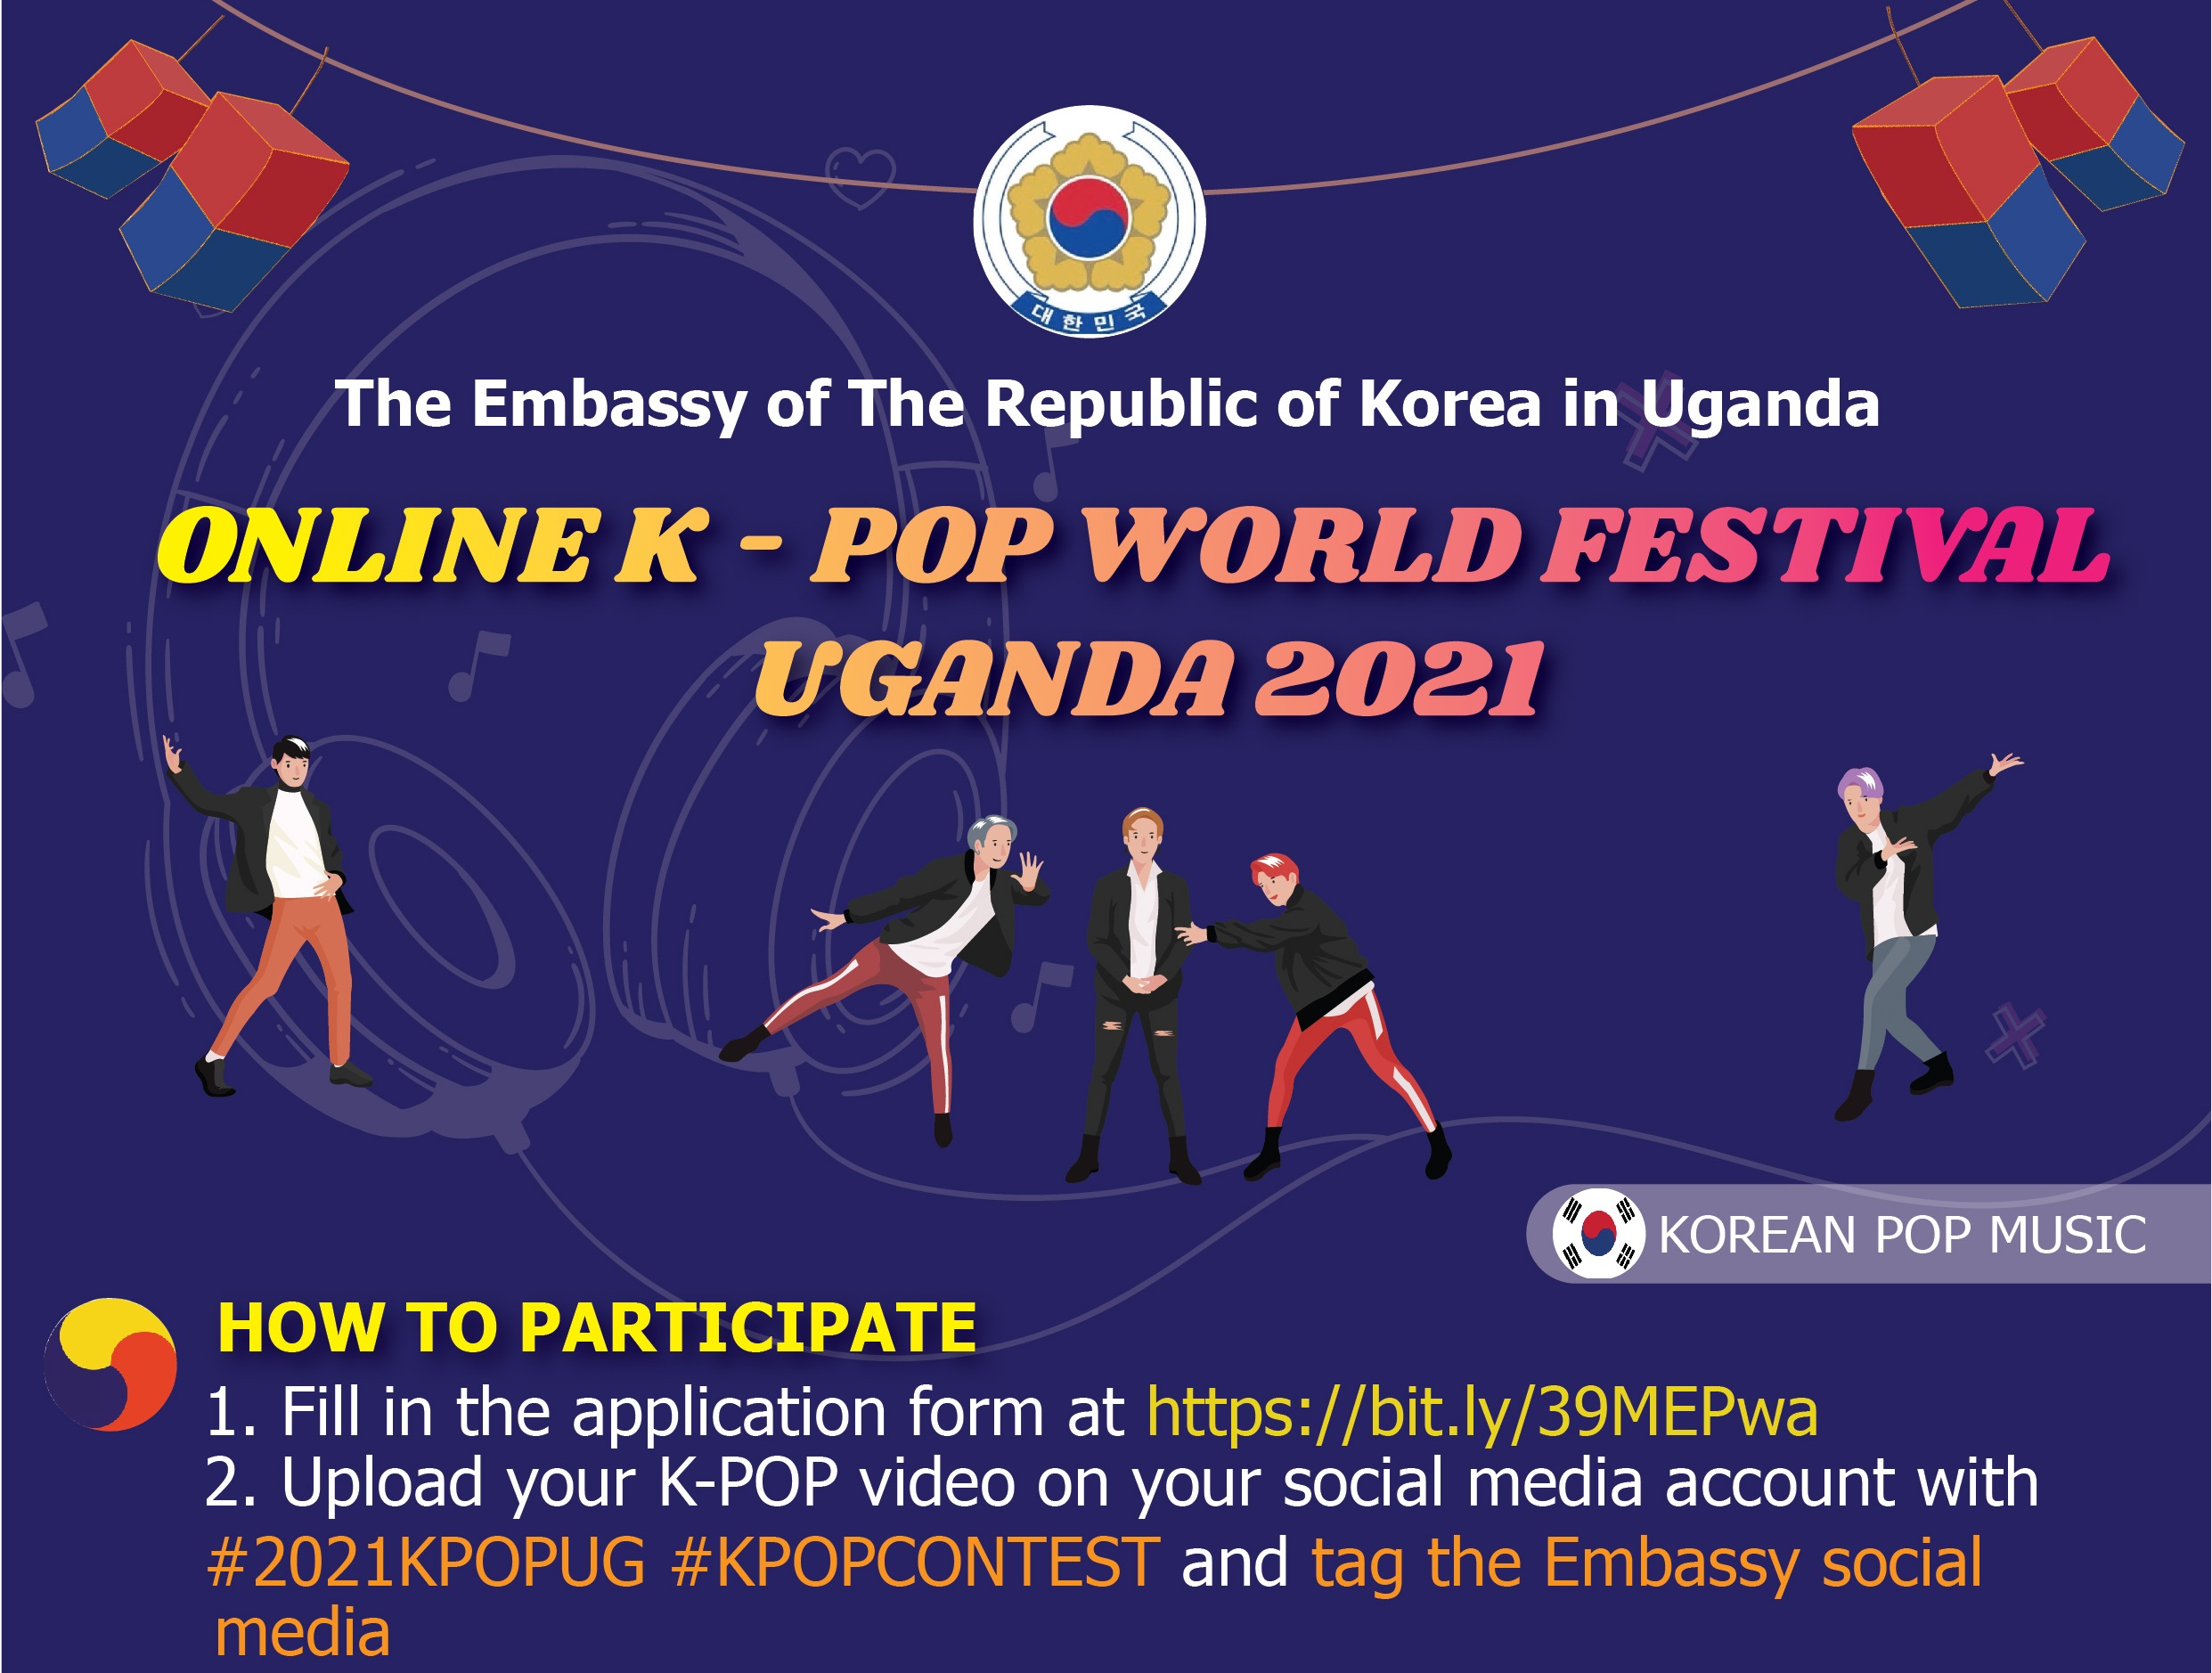 Call for Applications: Embassy of the Republic of Korea in Uganda Online K-POP World Festival 2021. Application Period: 1st - 28th May, 2021.